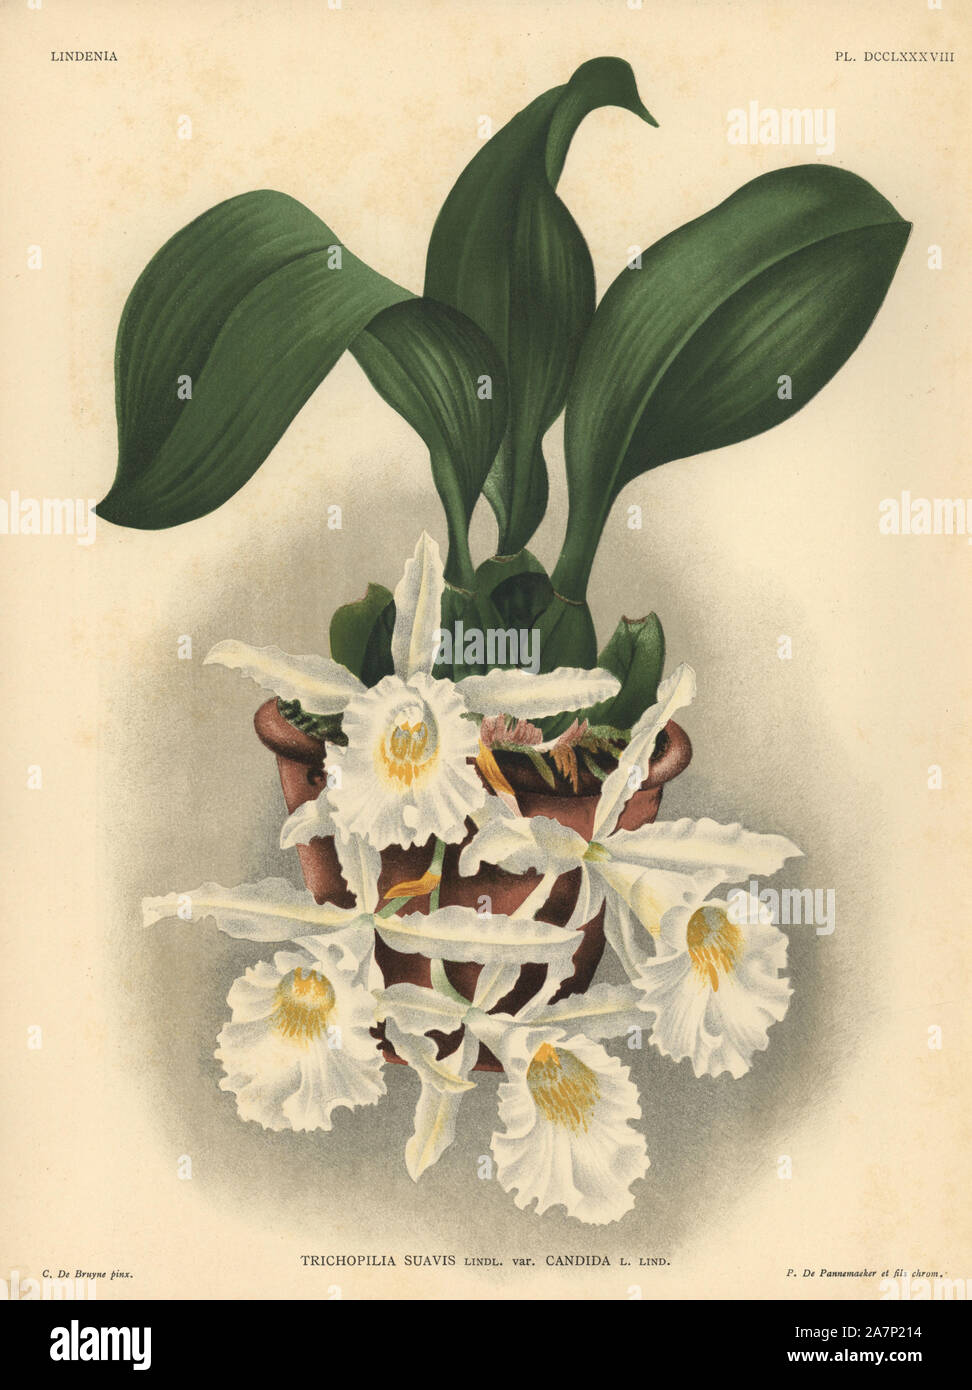 Candida variety of Trichopilia suavis orchid. Illustration drawn by C. de Bruyne and chromolithographed by P. de Pannemaeker et fils from Lucien Linden's 'Lindenia, Iconographie des Orchidees,' Brussels, 1902. Stock Photo